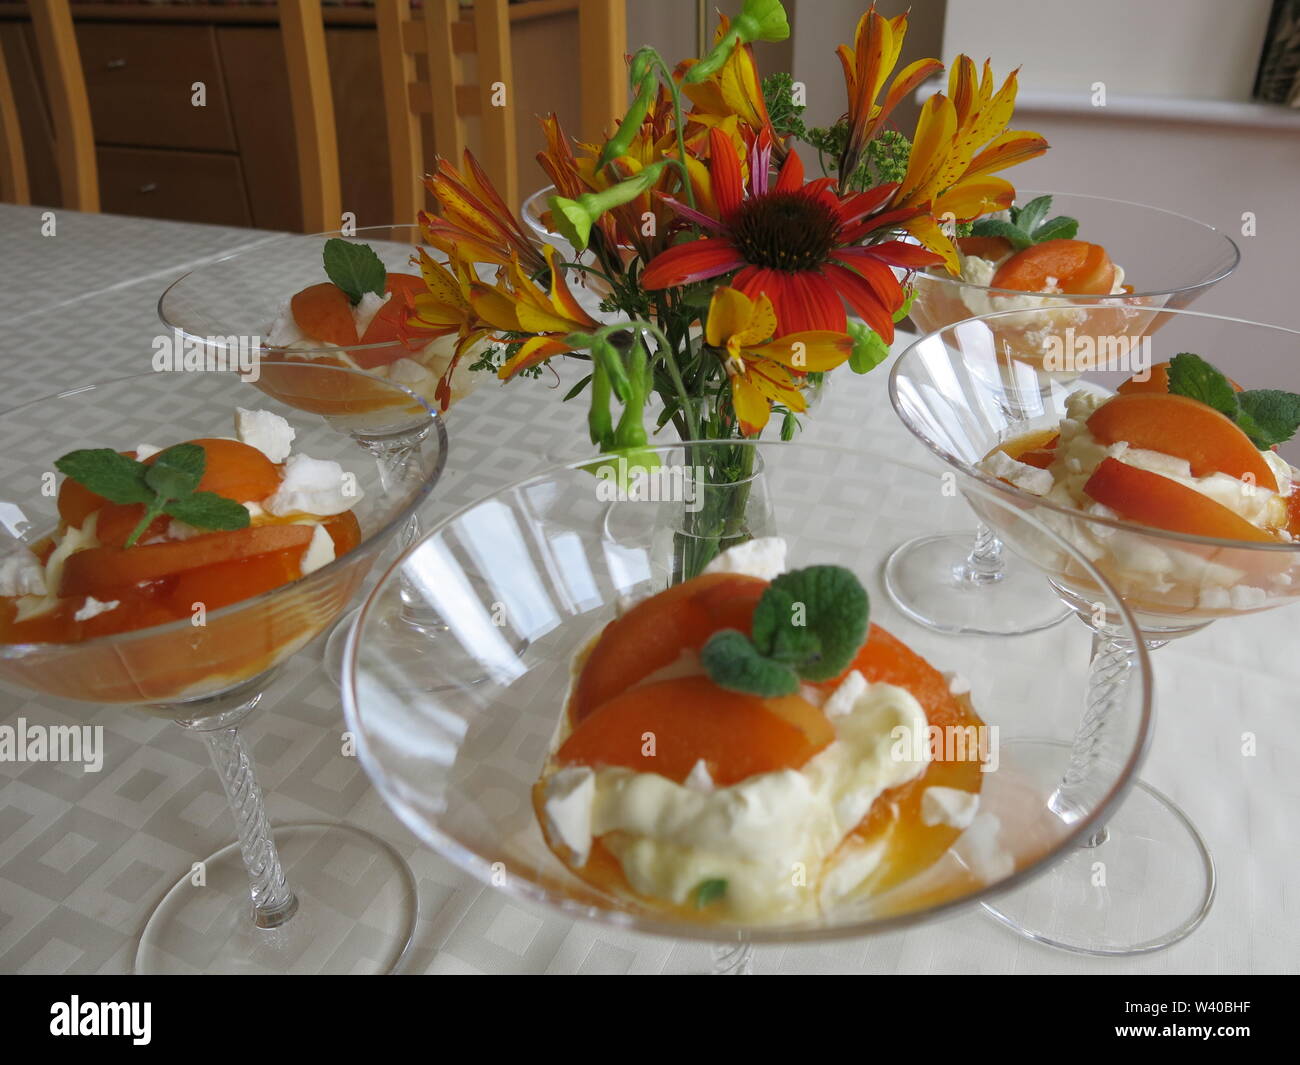 Array of dessert glasses arranged round a small vase of flowers for summer dining; apricot, white chocolate & whipped cream fool garnished with mint. Stock Photo